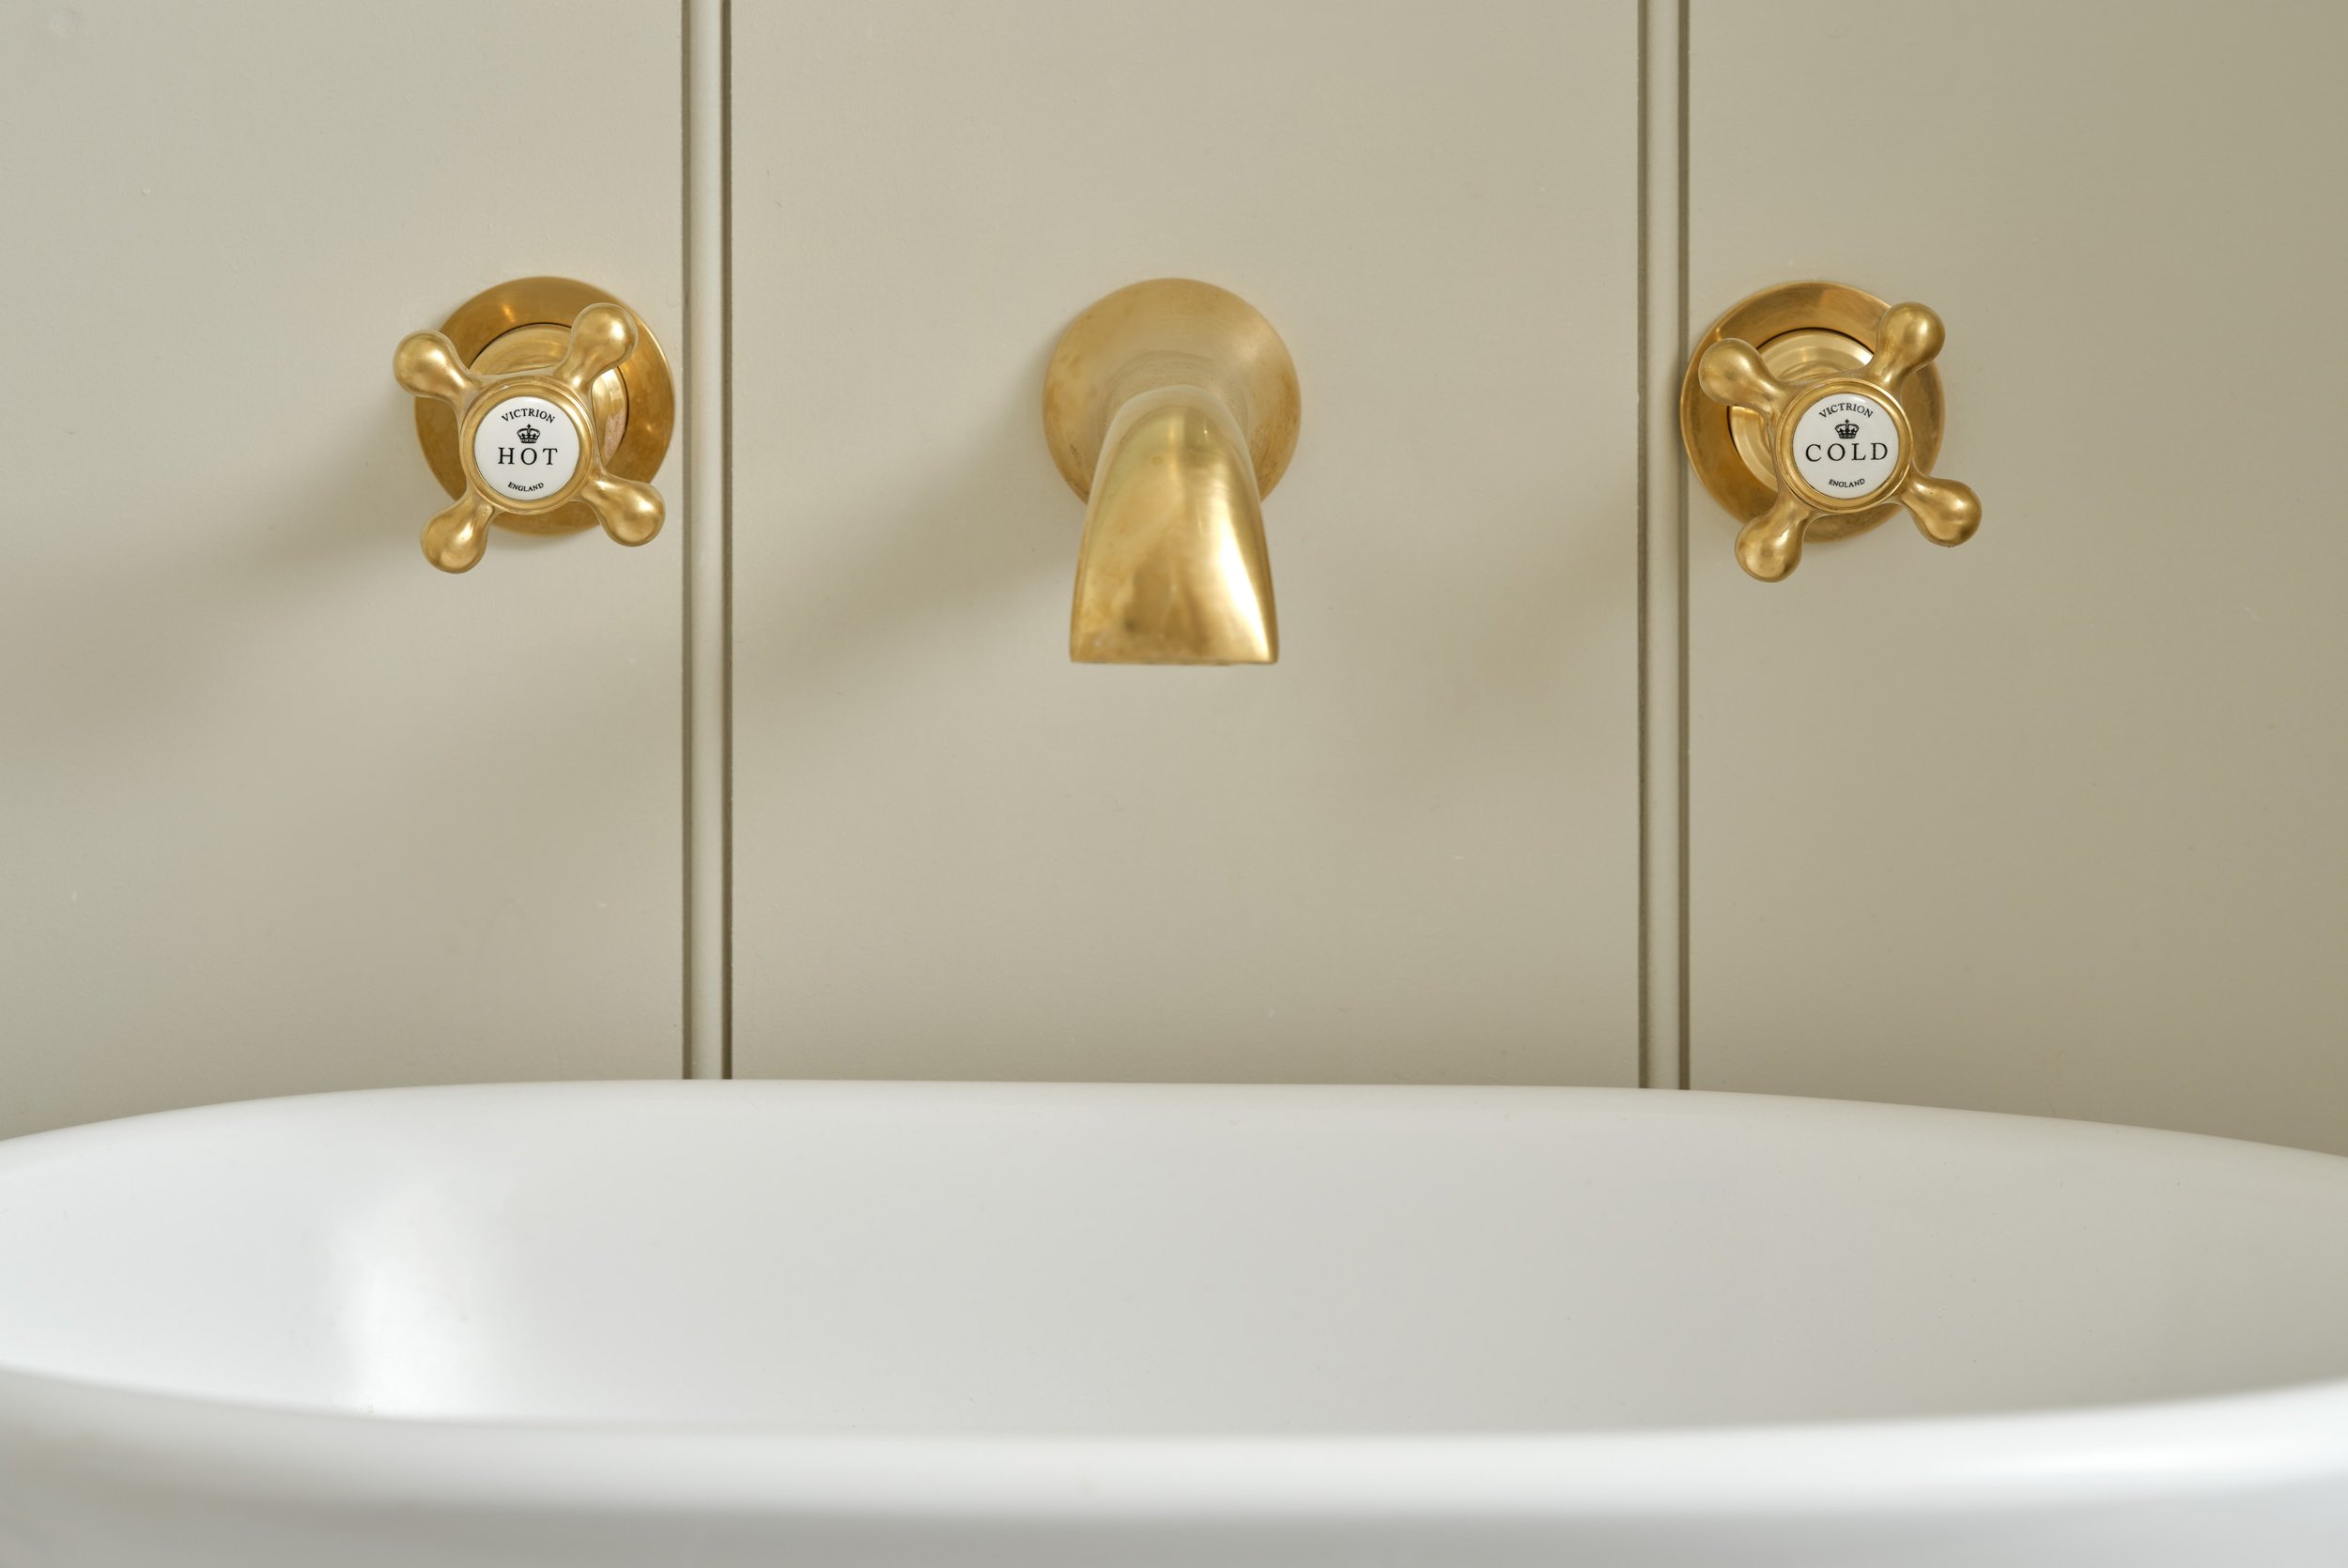 traditionl-gold-basin-taps-on-oainted-panelling.jpg